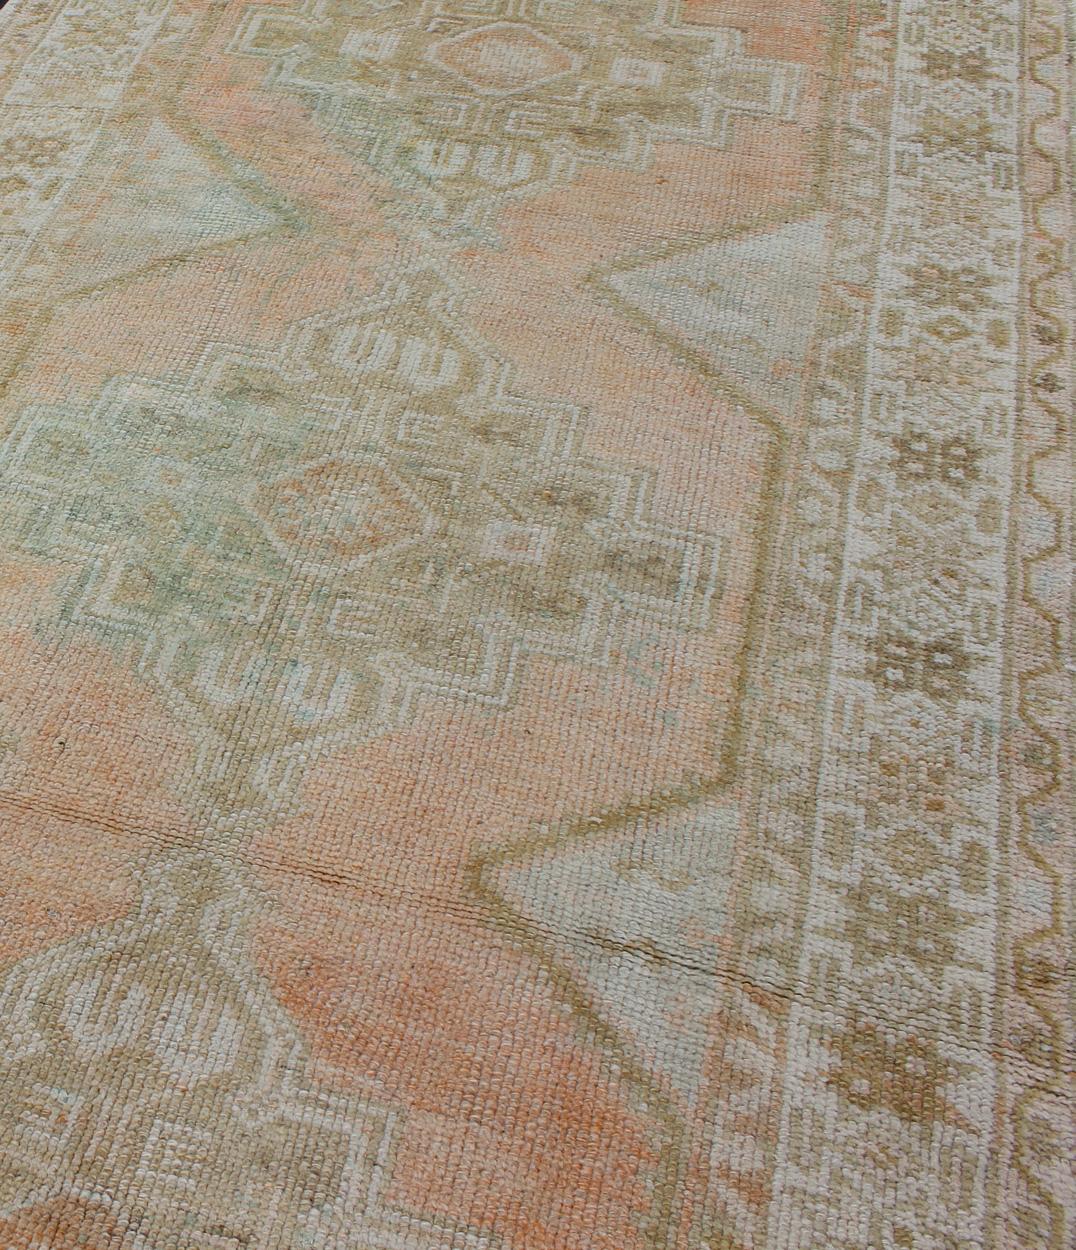 Vintage Turkish Oushak Runner with Faded Coral, Green and Light Brown 2